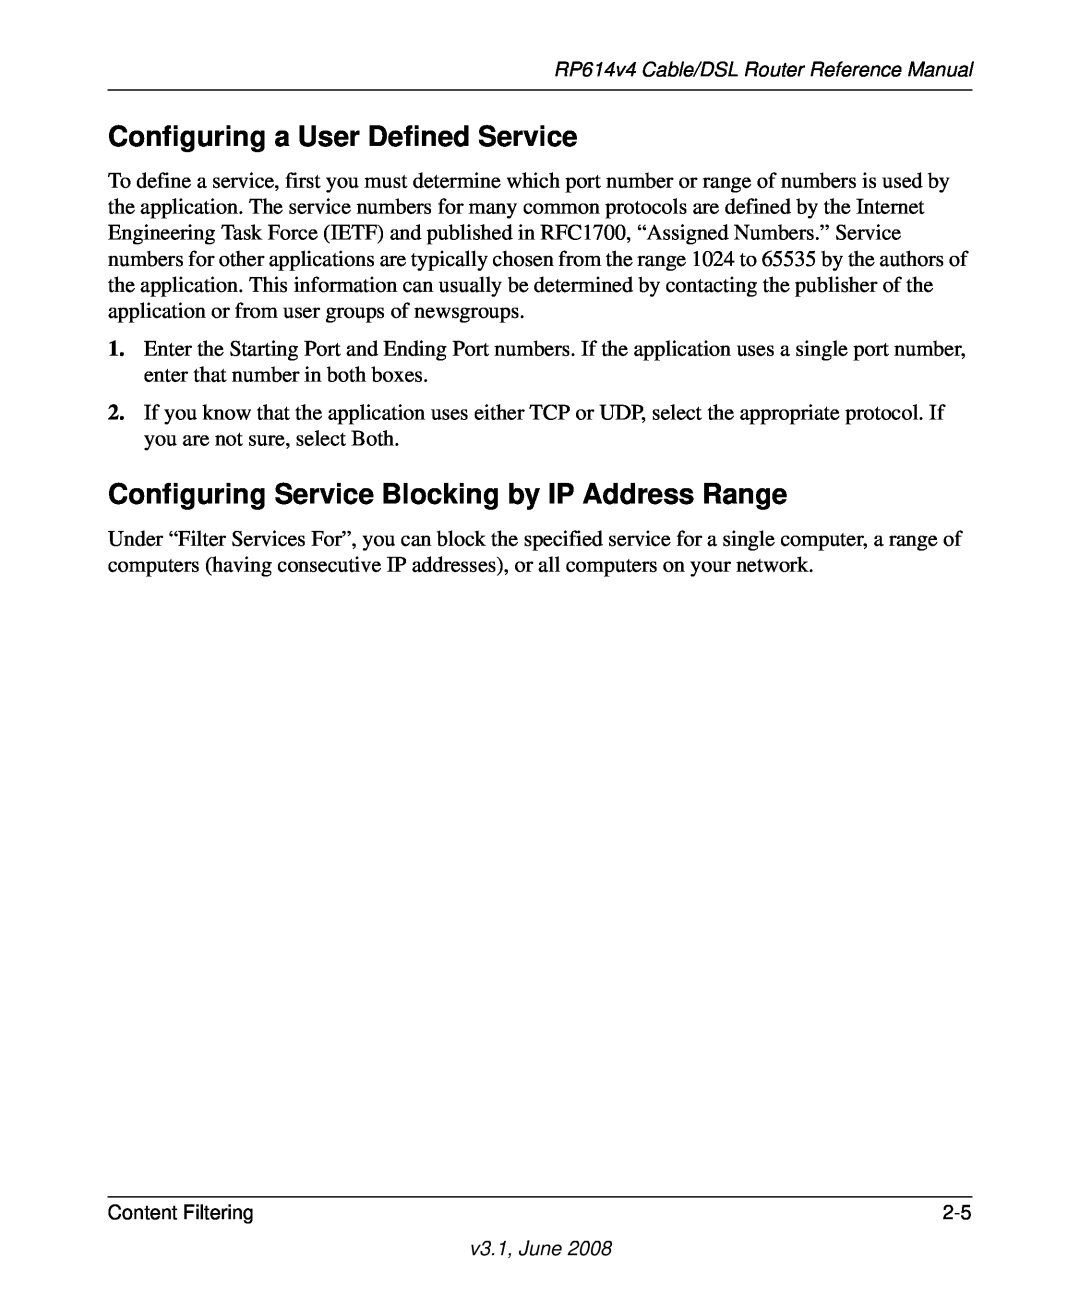 NETGEAR RP614 v4 manual Configuring a User Defined Service, Configuring Service Blocking by IP Address Range 